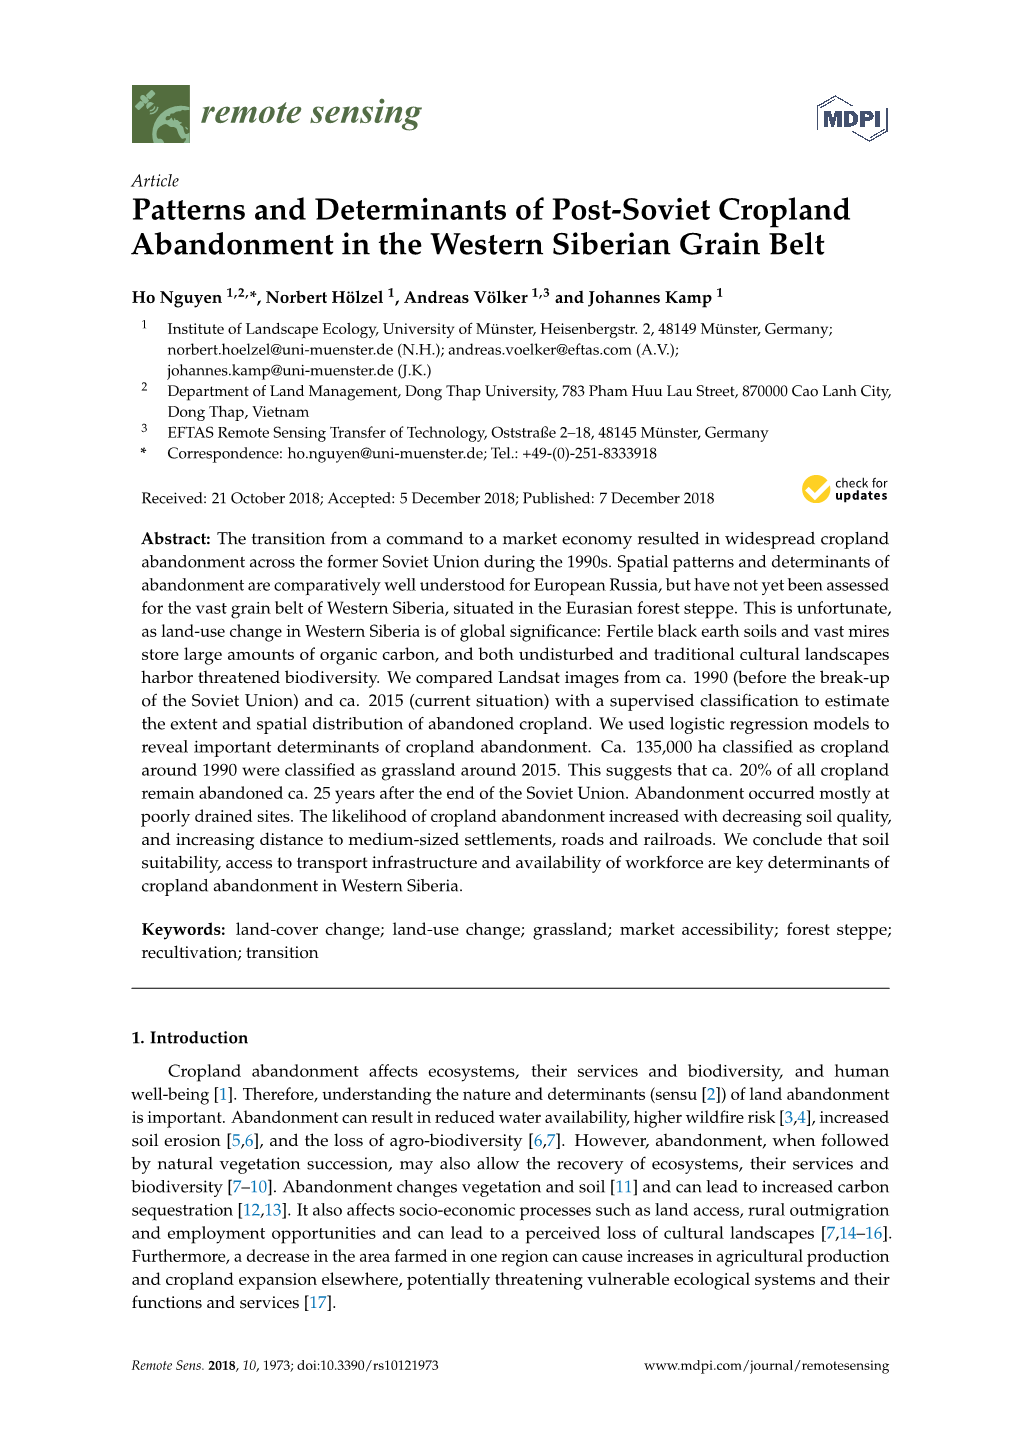 Patterns and Determinants of Post-Soviet Cropland Abandonment in the Western Siberian Grain Belt